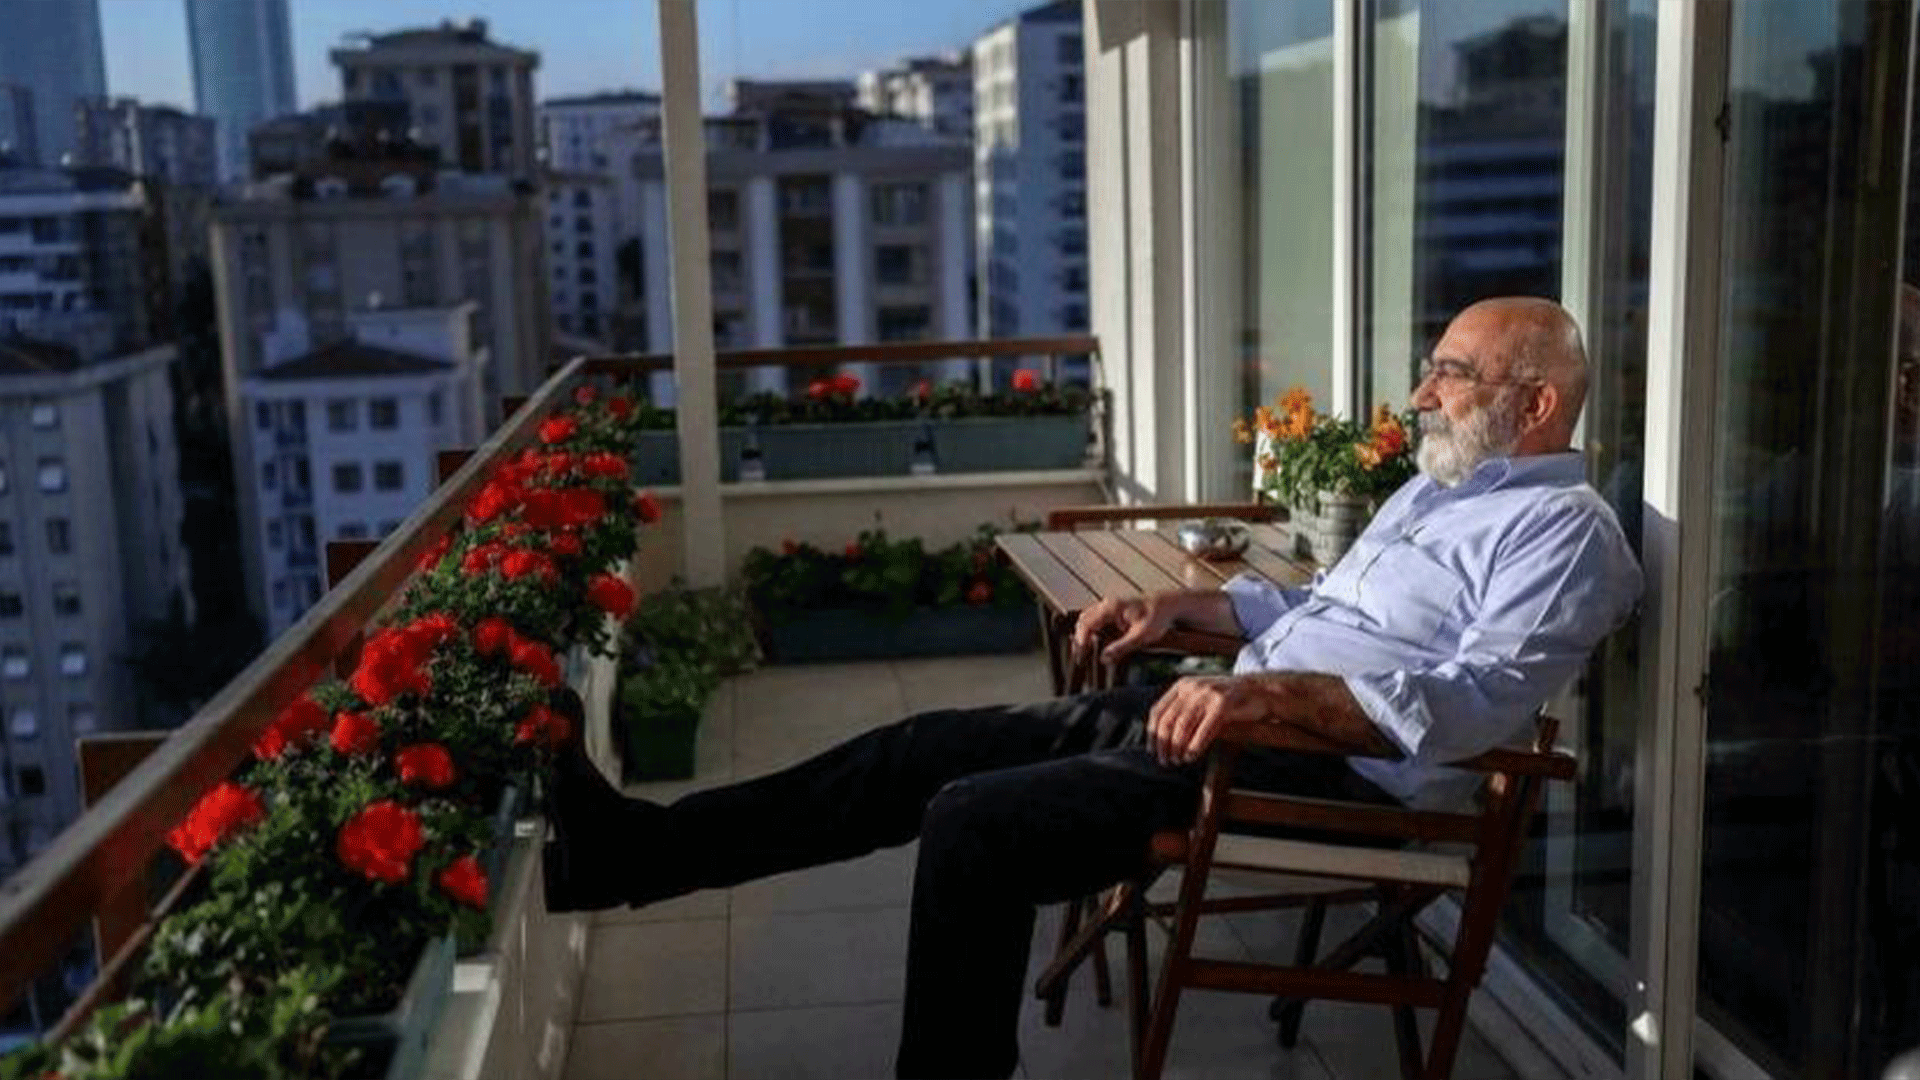  Turkish author Ahmet Altan says he feels an added urgency to write after spending nearly five years in jail on tenuous charges BULENT KILIC AFP